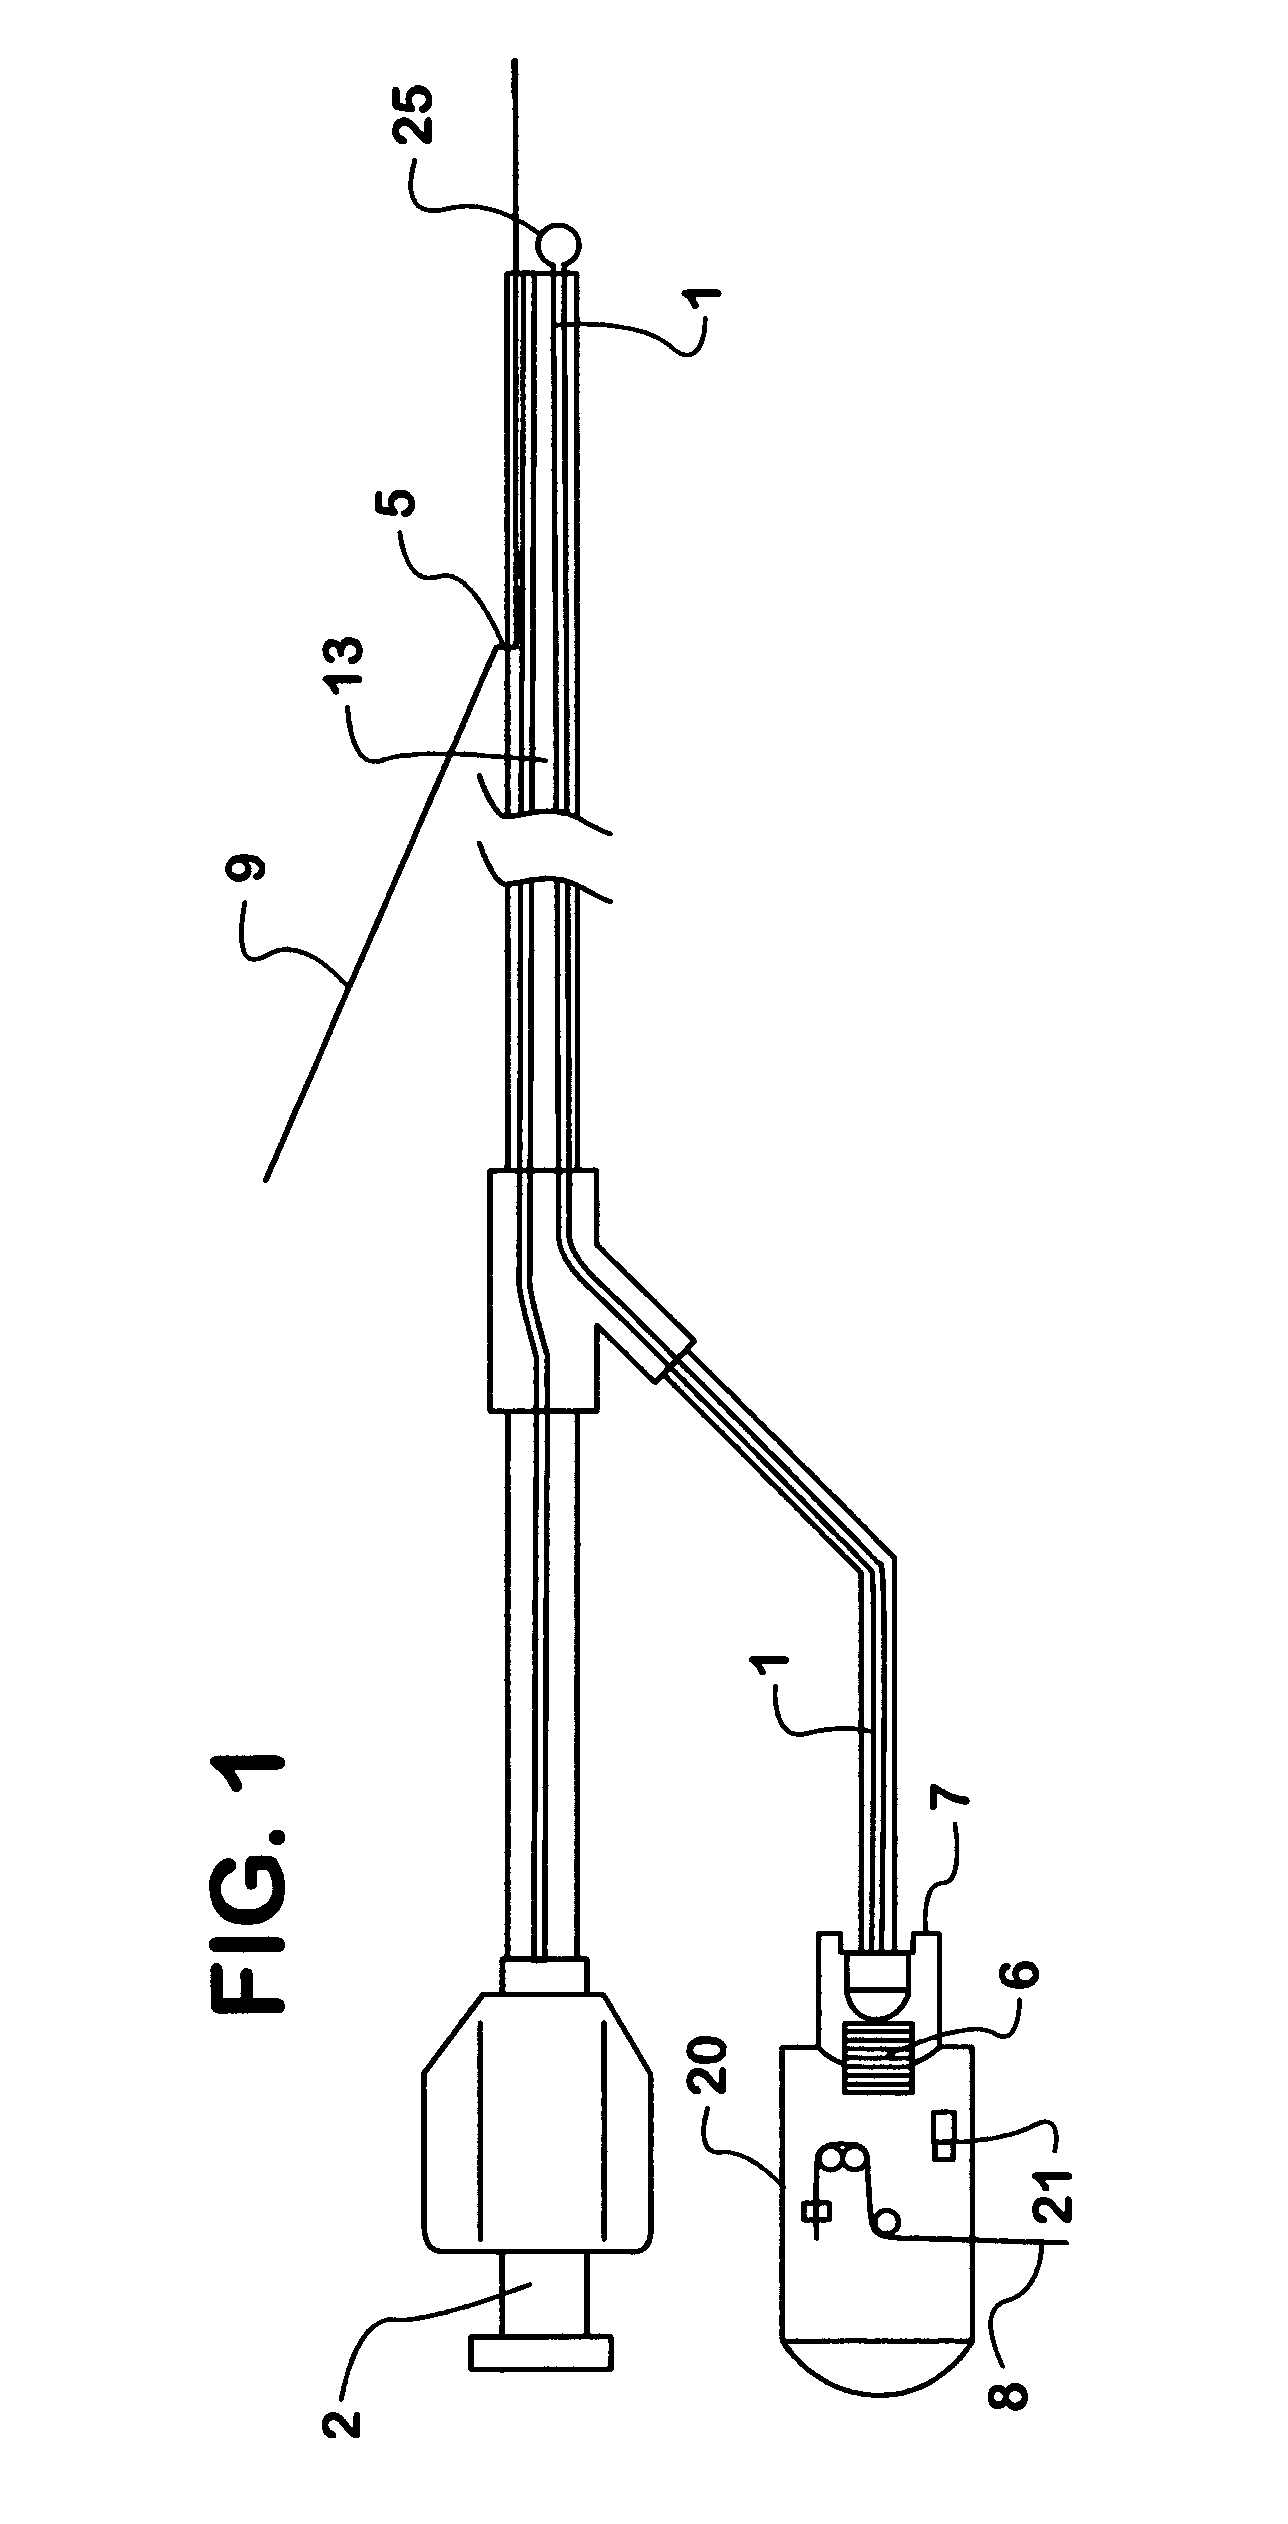 Electromagnetic photonic catheter for reducing restenosis